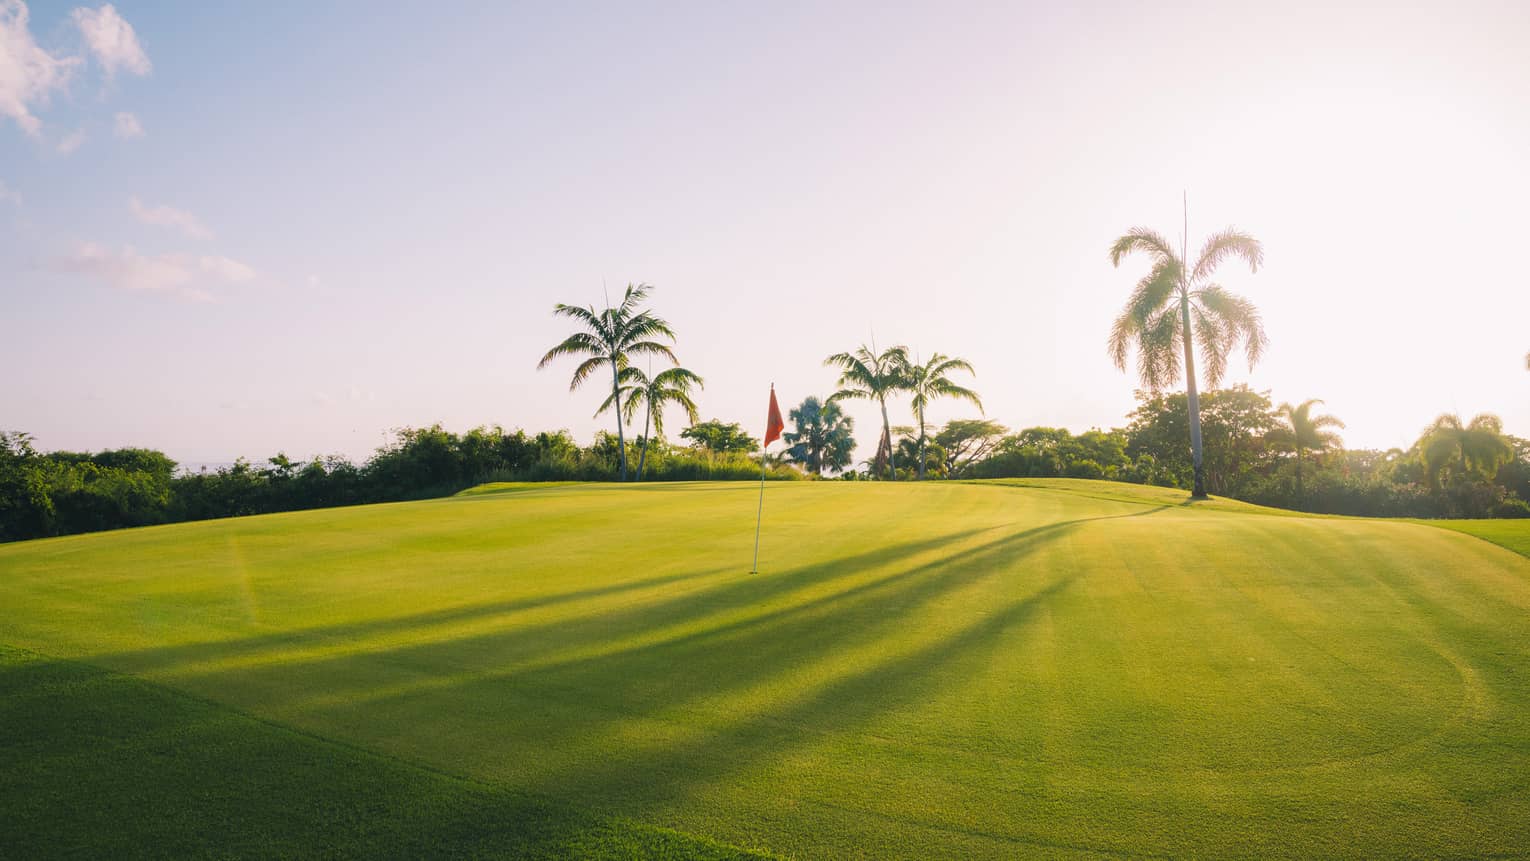 A golf course green on a bright sunny day with palm trees scattered on the course.